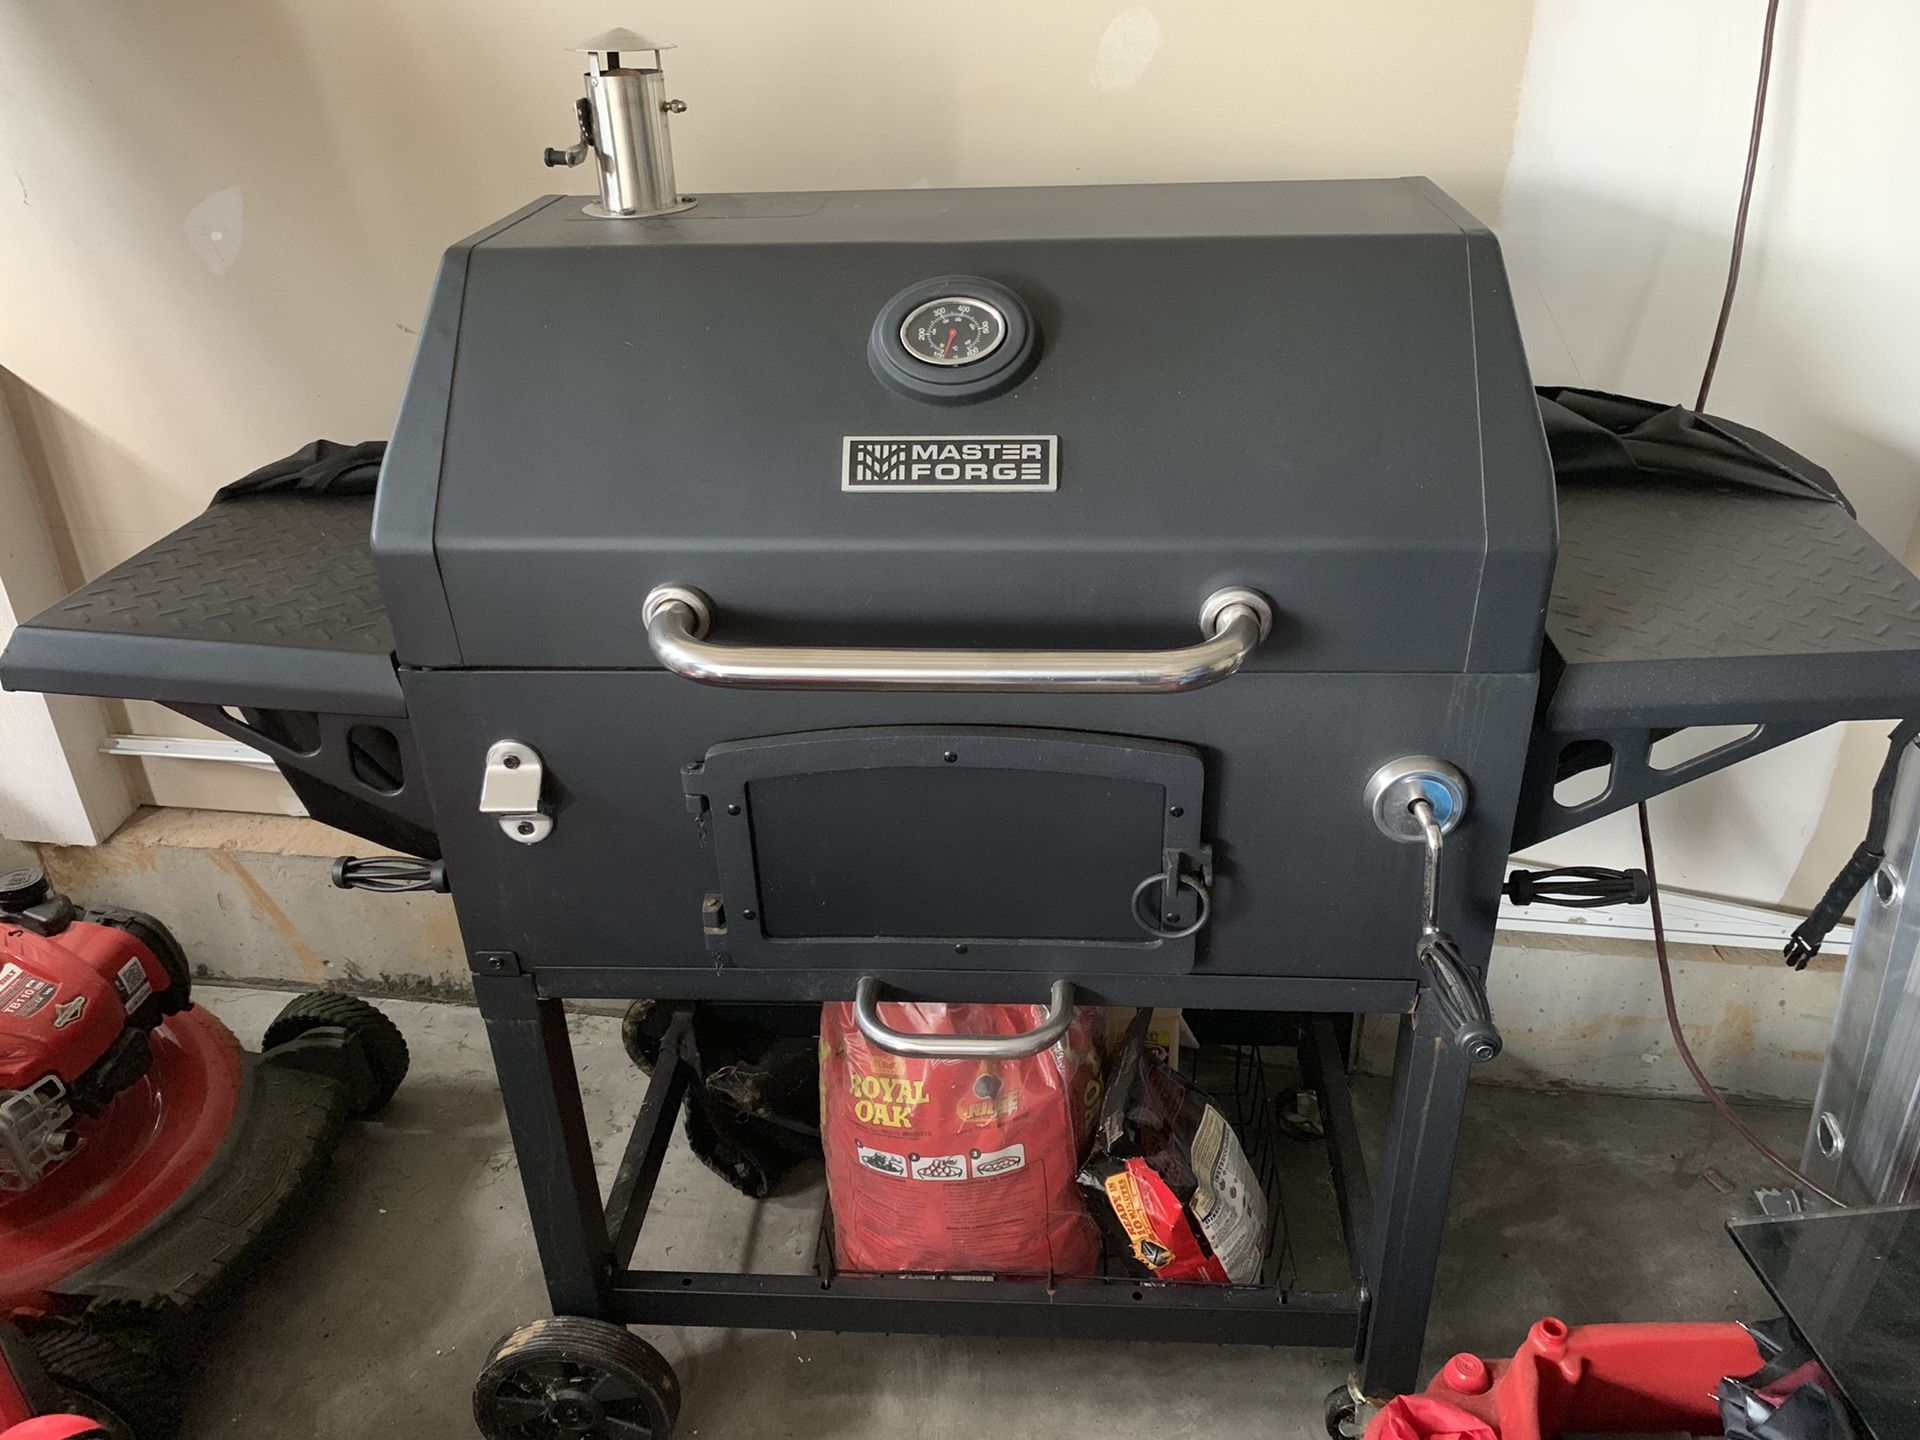 Weber Master Forge Charcoal grill